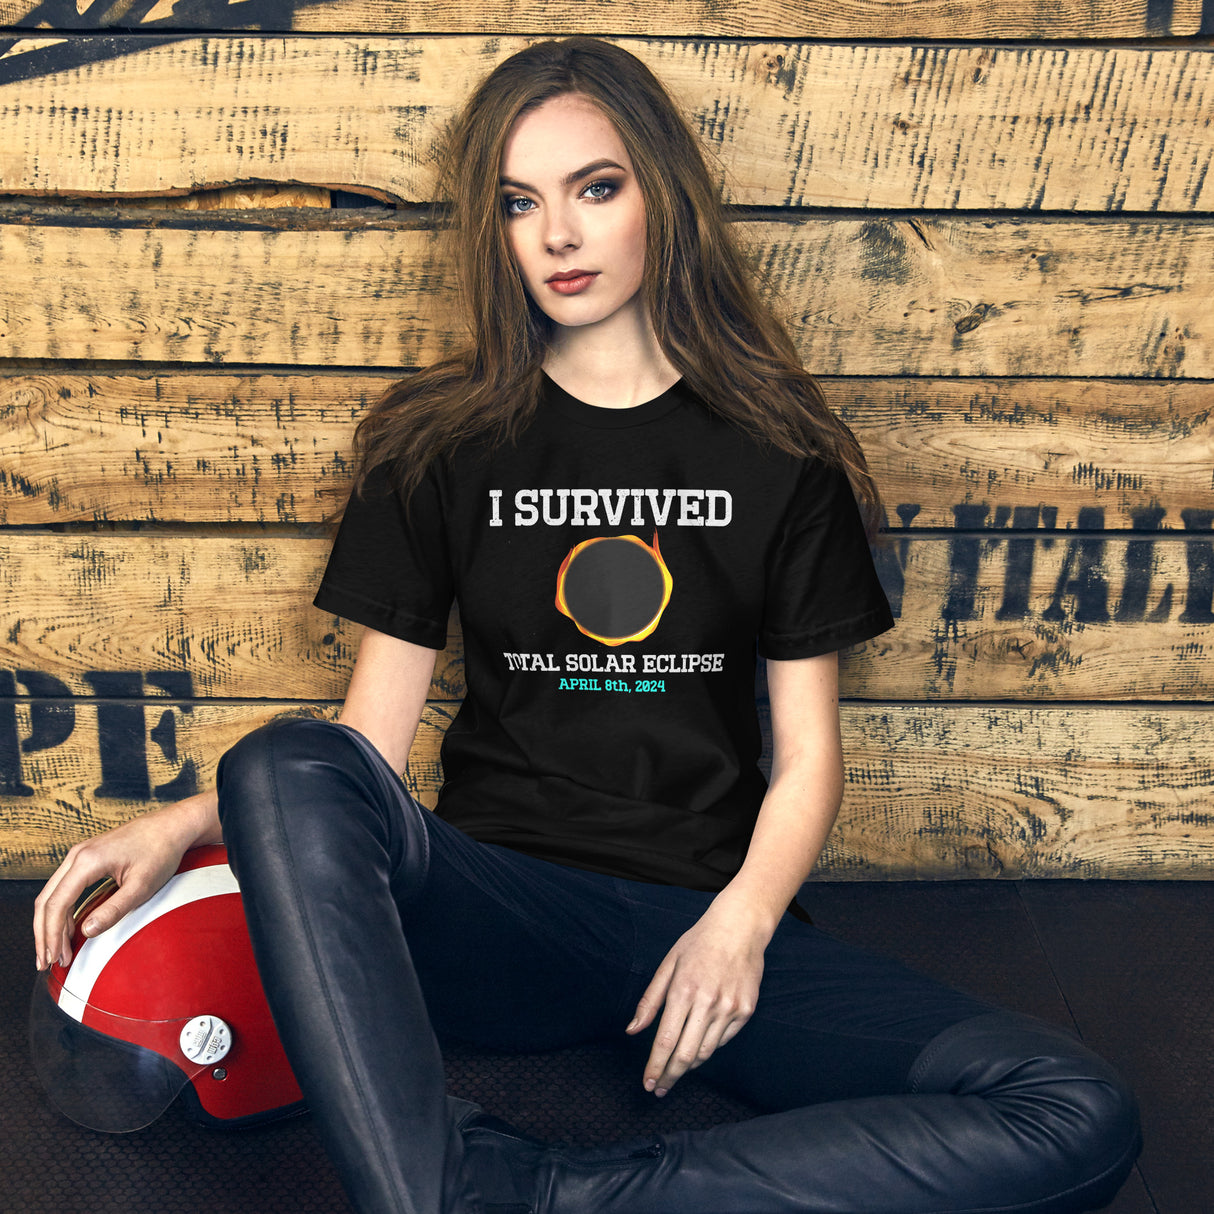 I Survived The Total Solar Eclipse of 2024 Women's Shirt